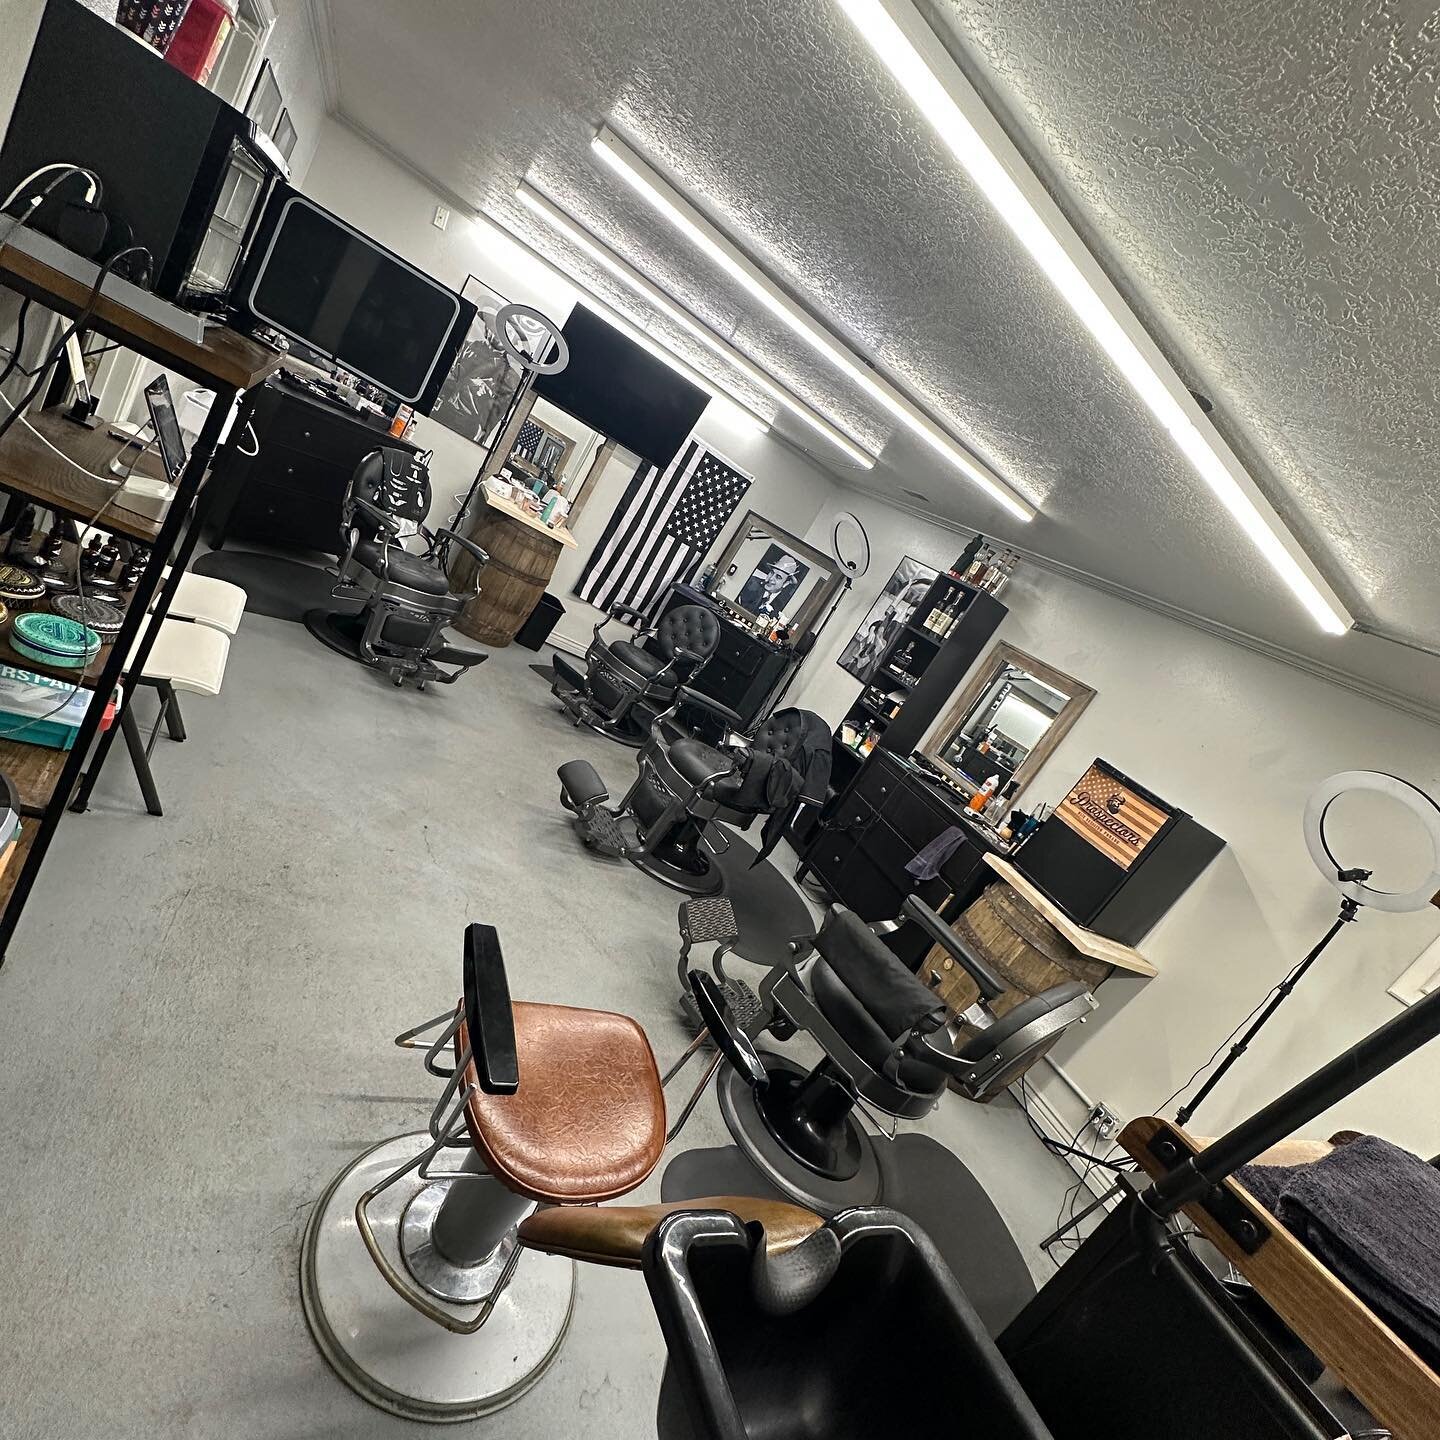 📍 Exciting News! 📍 We invite you to visit our new location in Orem, conveniently situated just off Center Street exit off of I-15. Formerly known as Blade &amp; Beard, we are thrilled to introduce you to Regal Barber Co. 🪒✂️

At Regal Barber Co., 